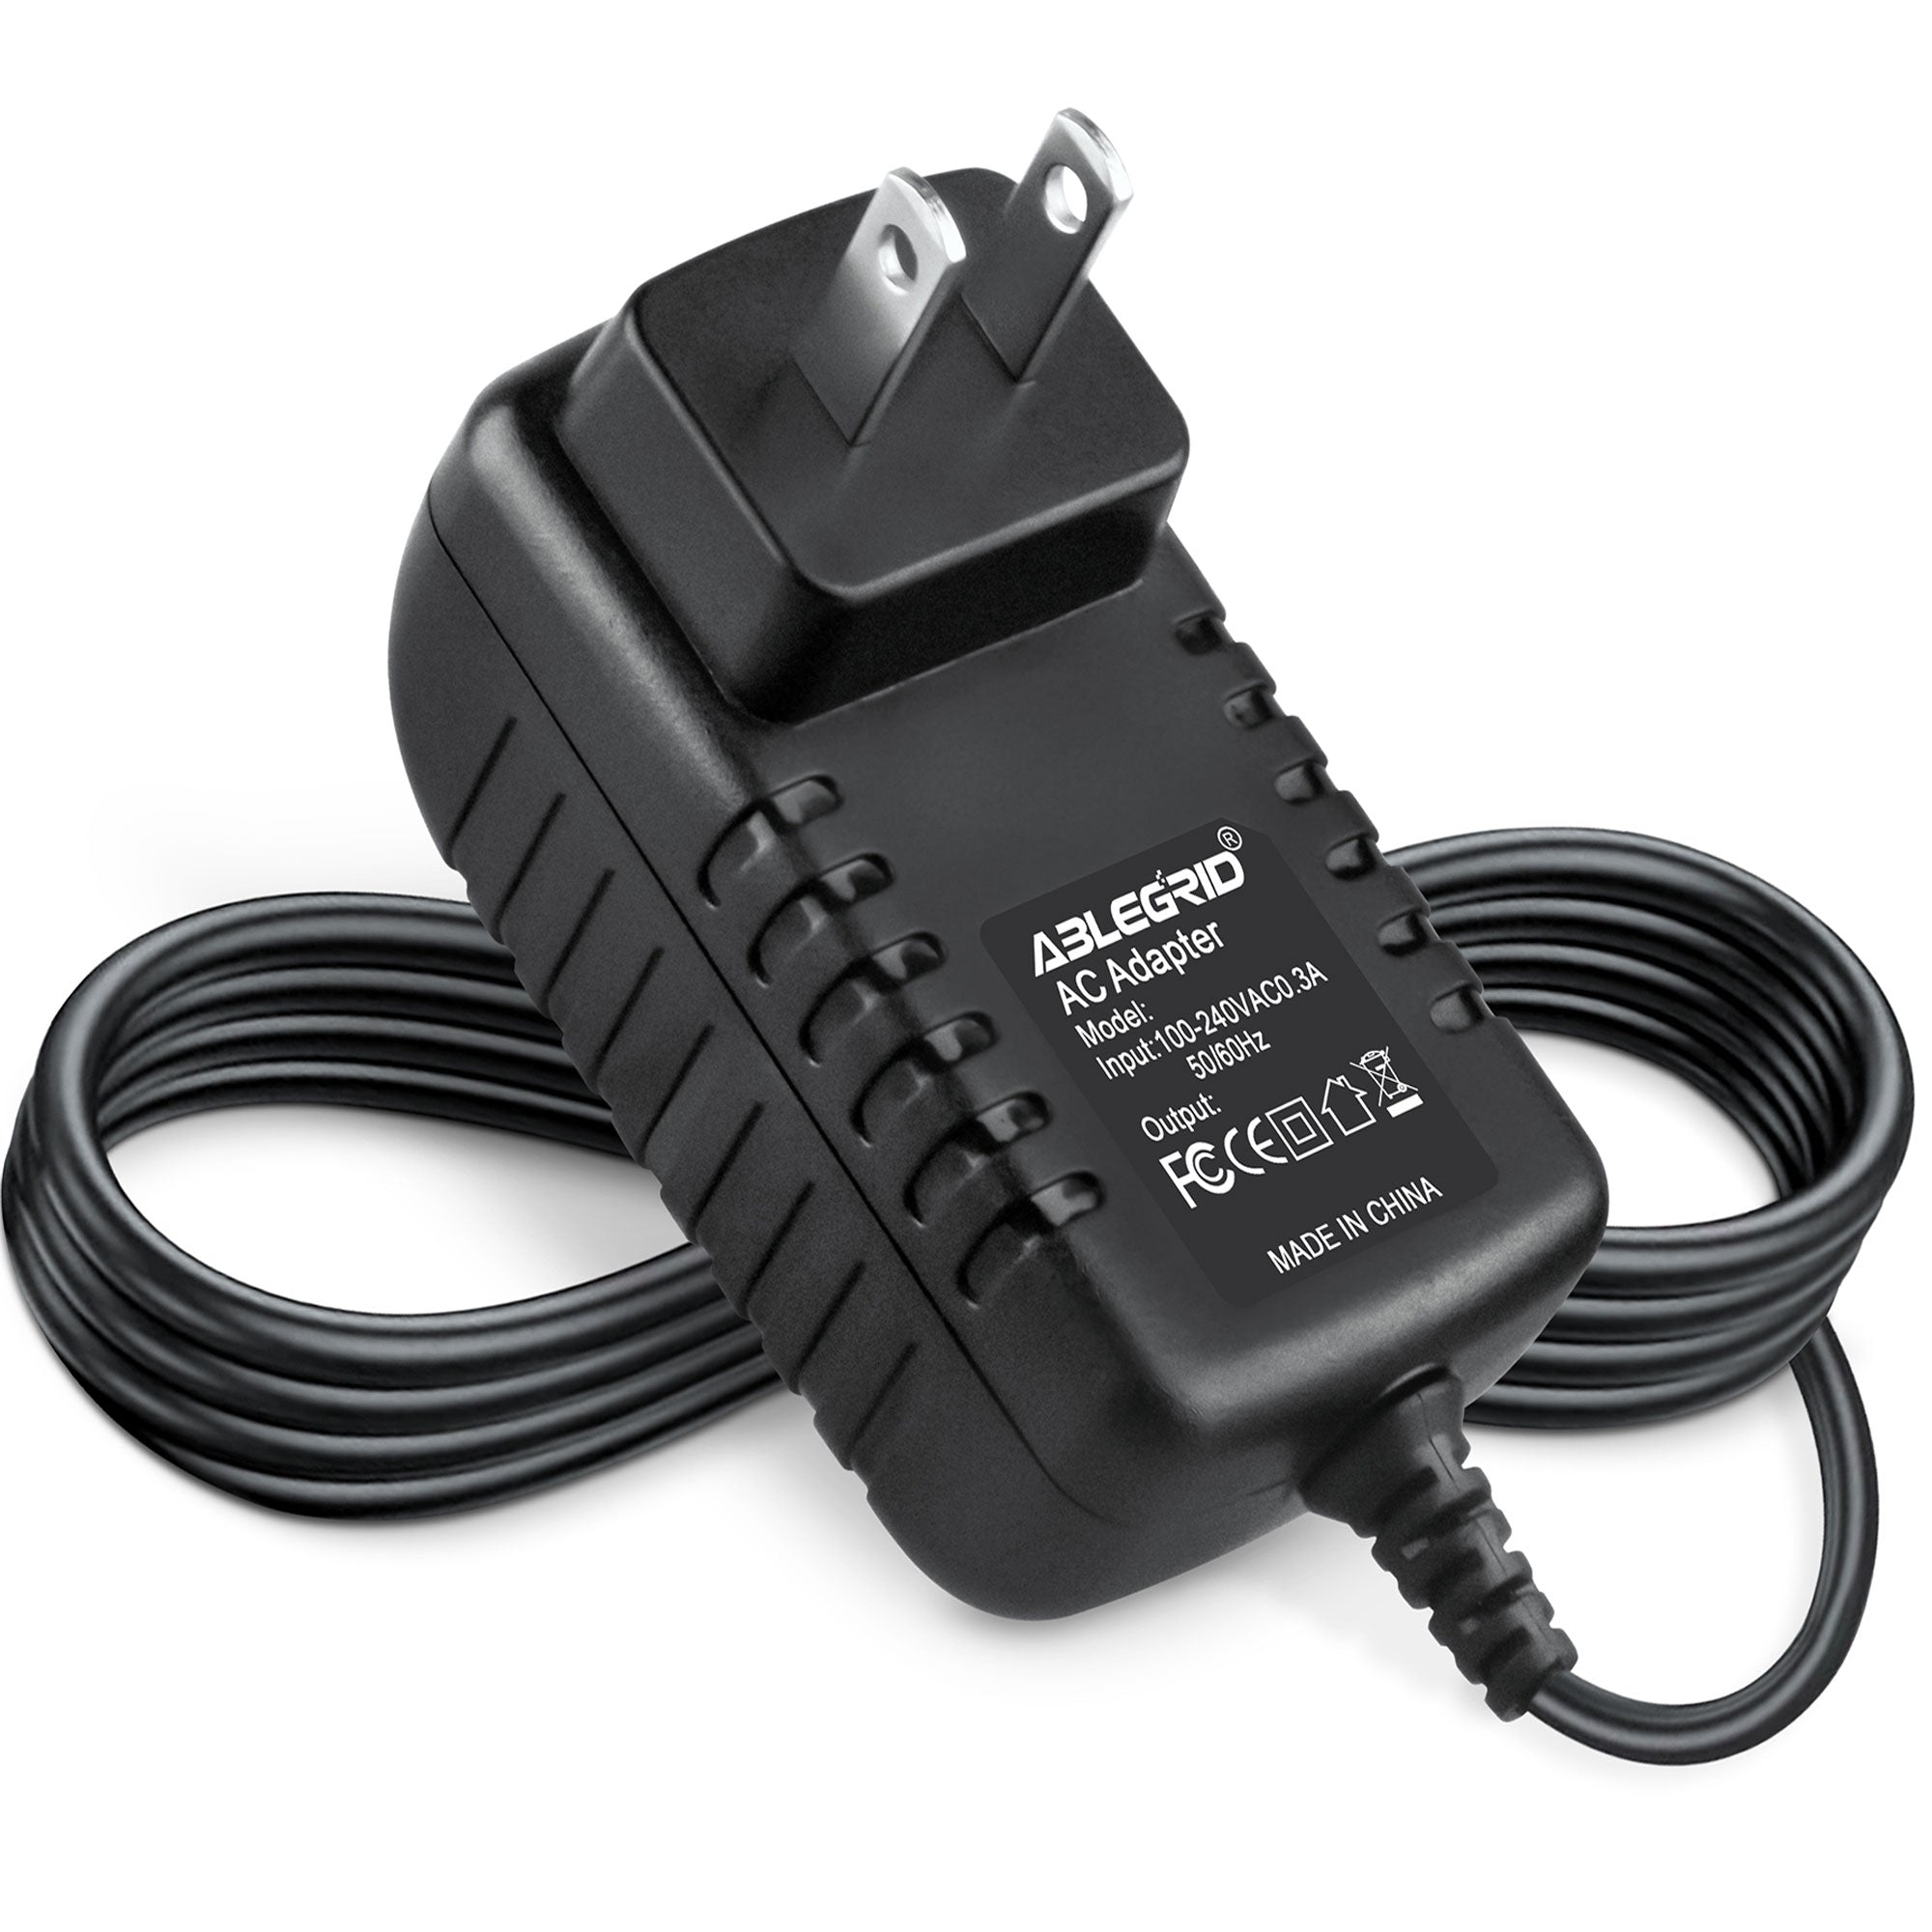 AbleGrid AC-DC Adapter for Model NO: D12-750 P/N PS-2.5-D Class 2 Transformer Power Supply Cord Cable PS Wall Home Charger Input: 100 - 240 VAC Worldwide Use Mains PSU